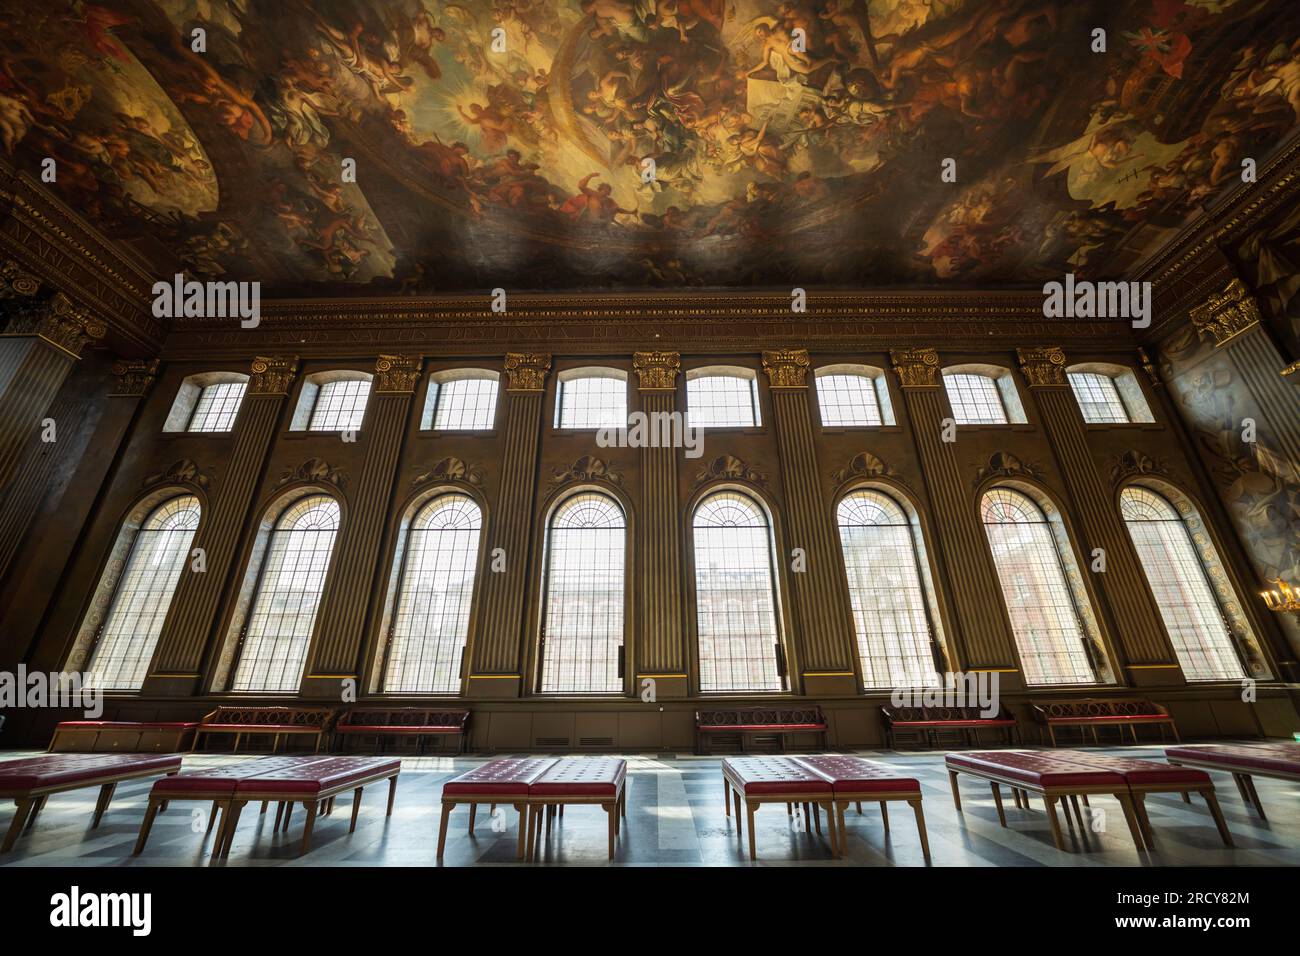 Old Royal Naval College, Greenwich, London, The Painted Hall, grand hall with ceiling painting of 200 figures of kings, queens and mythical creatures. Stock Photo